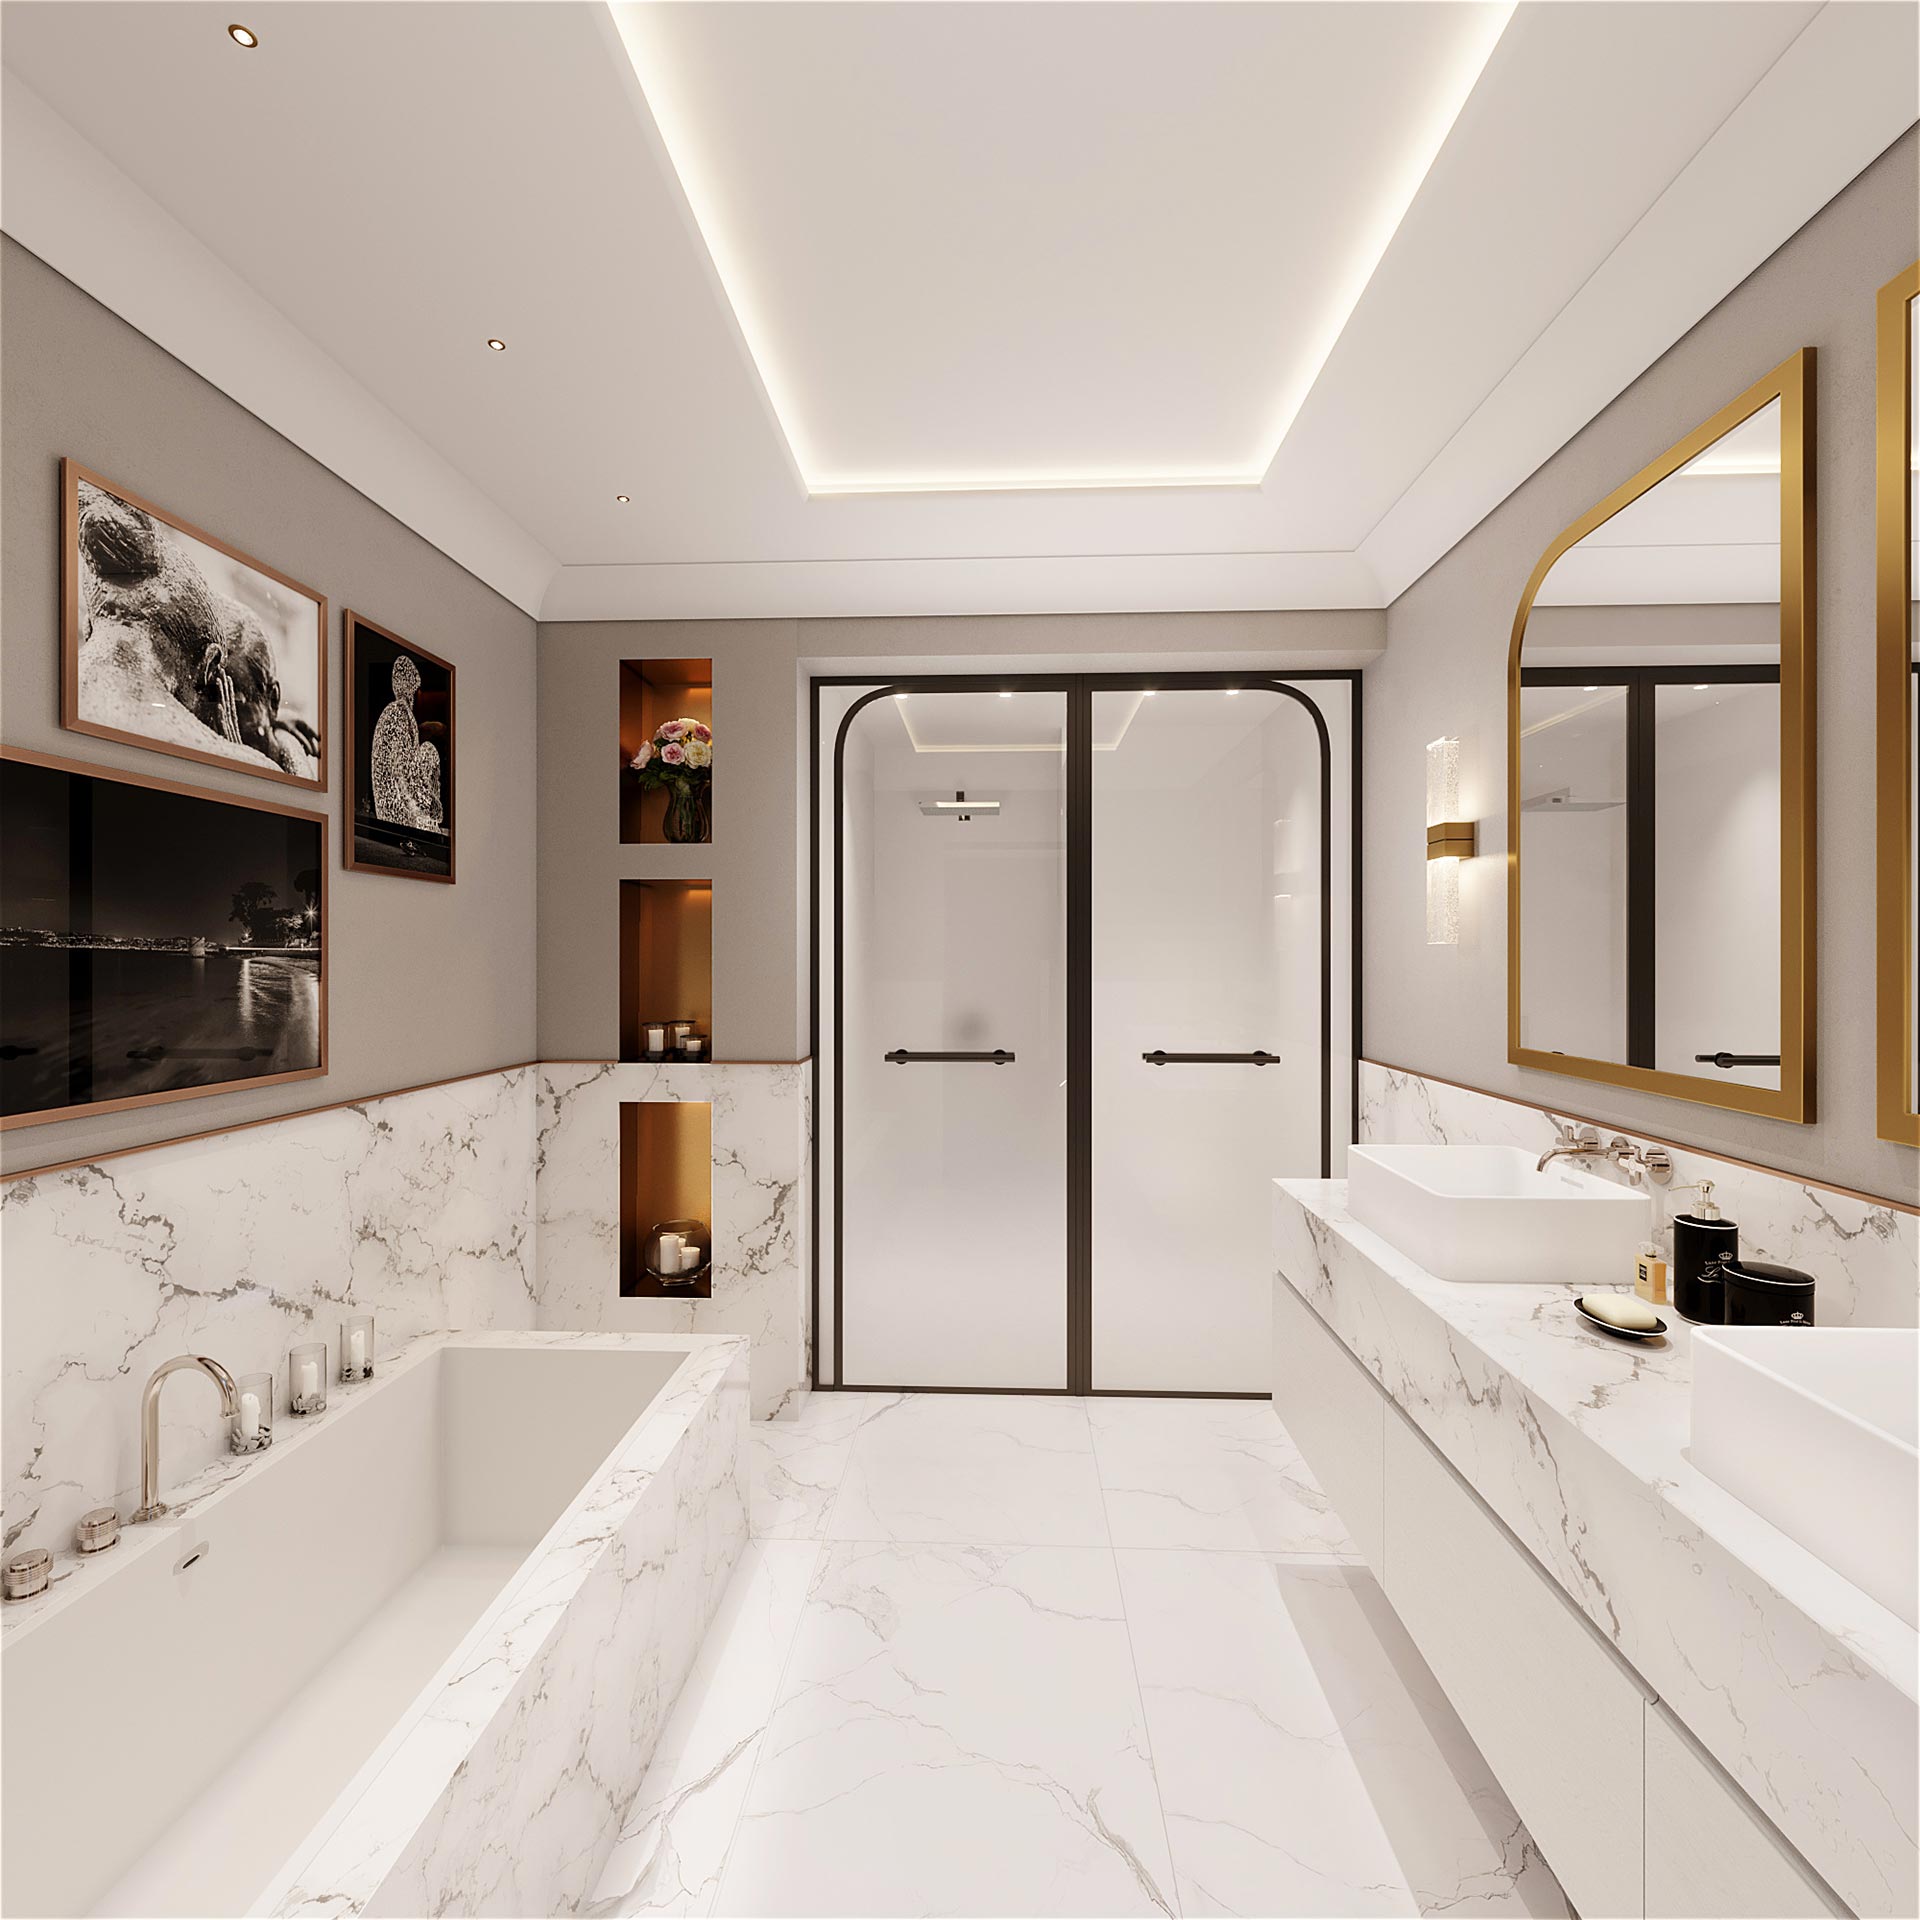 3D Perspective of a bathroom in a villa in Cannes